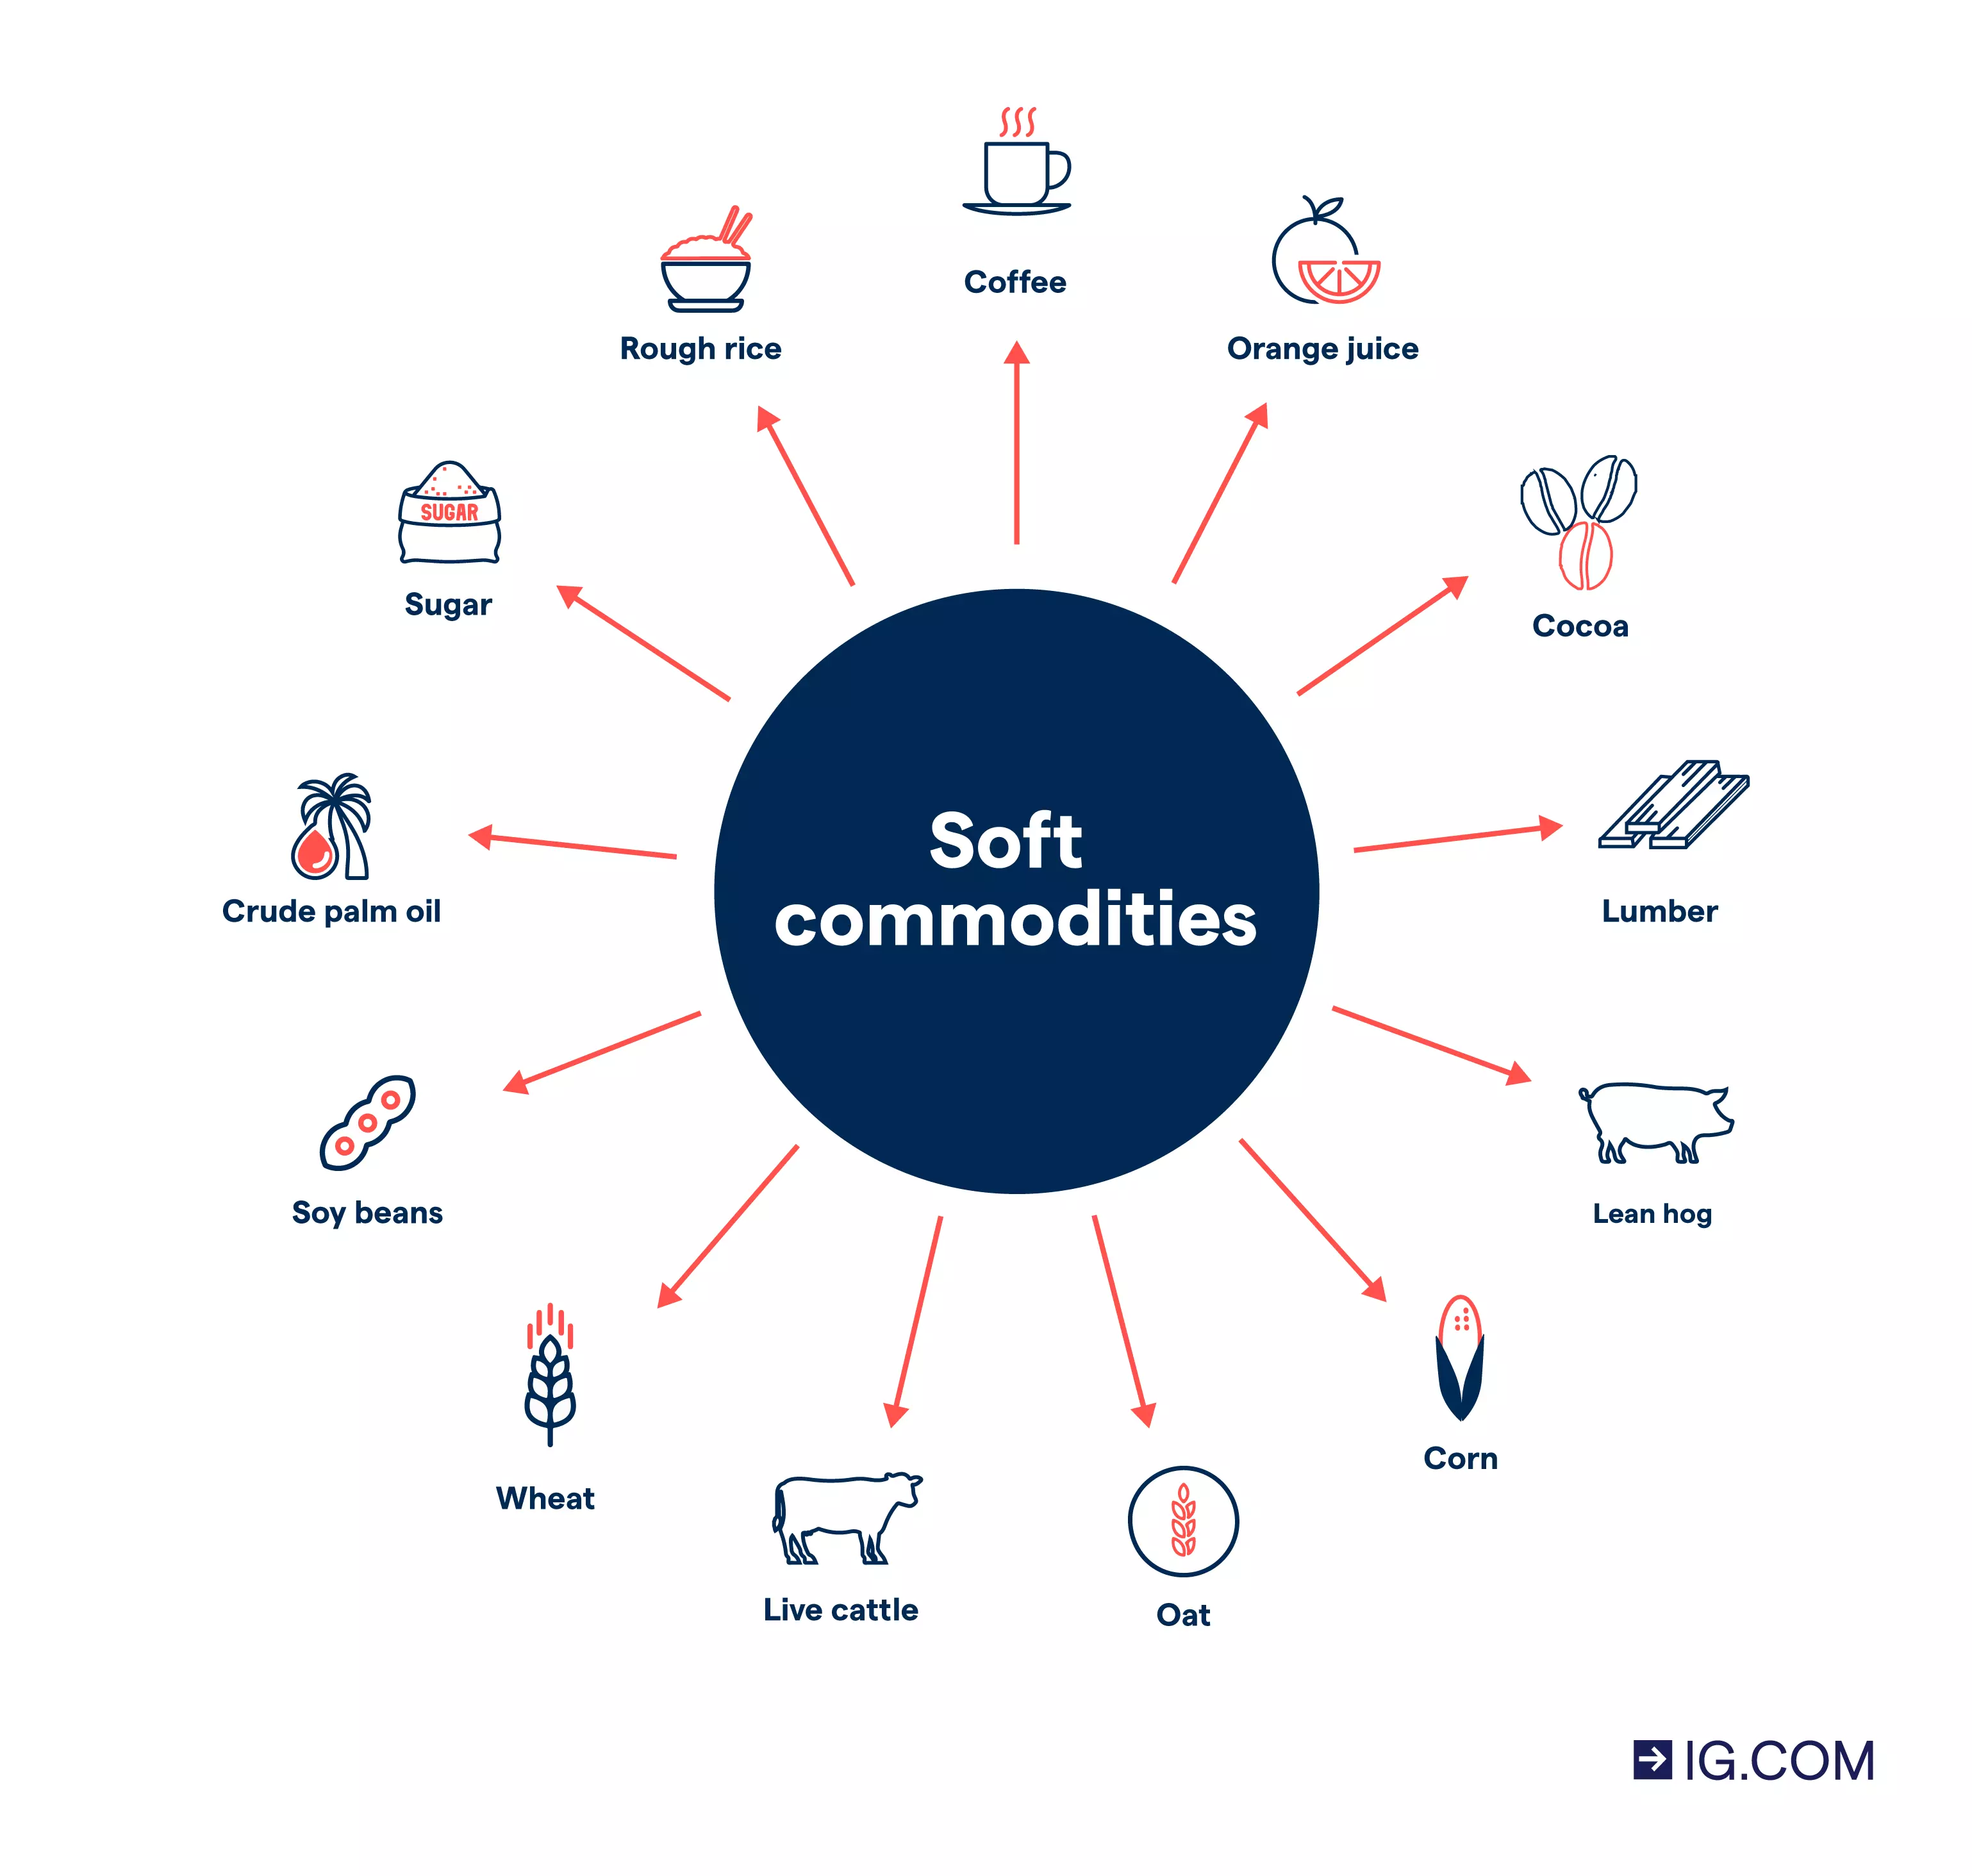 A mind map of various soft commodities, from the ones grown – cocoa, and rough rice, to the reared kind – like cattle and live hog, that you can trade or invest in.